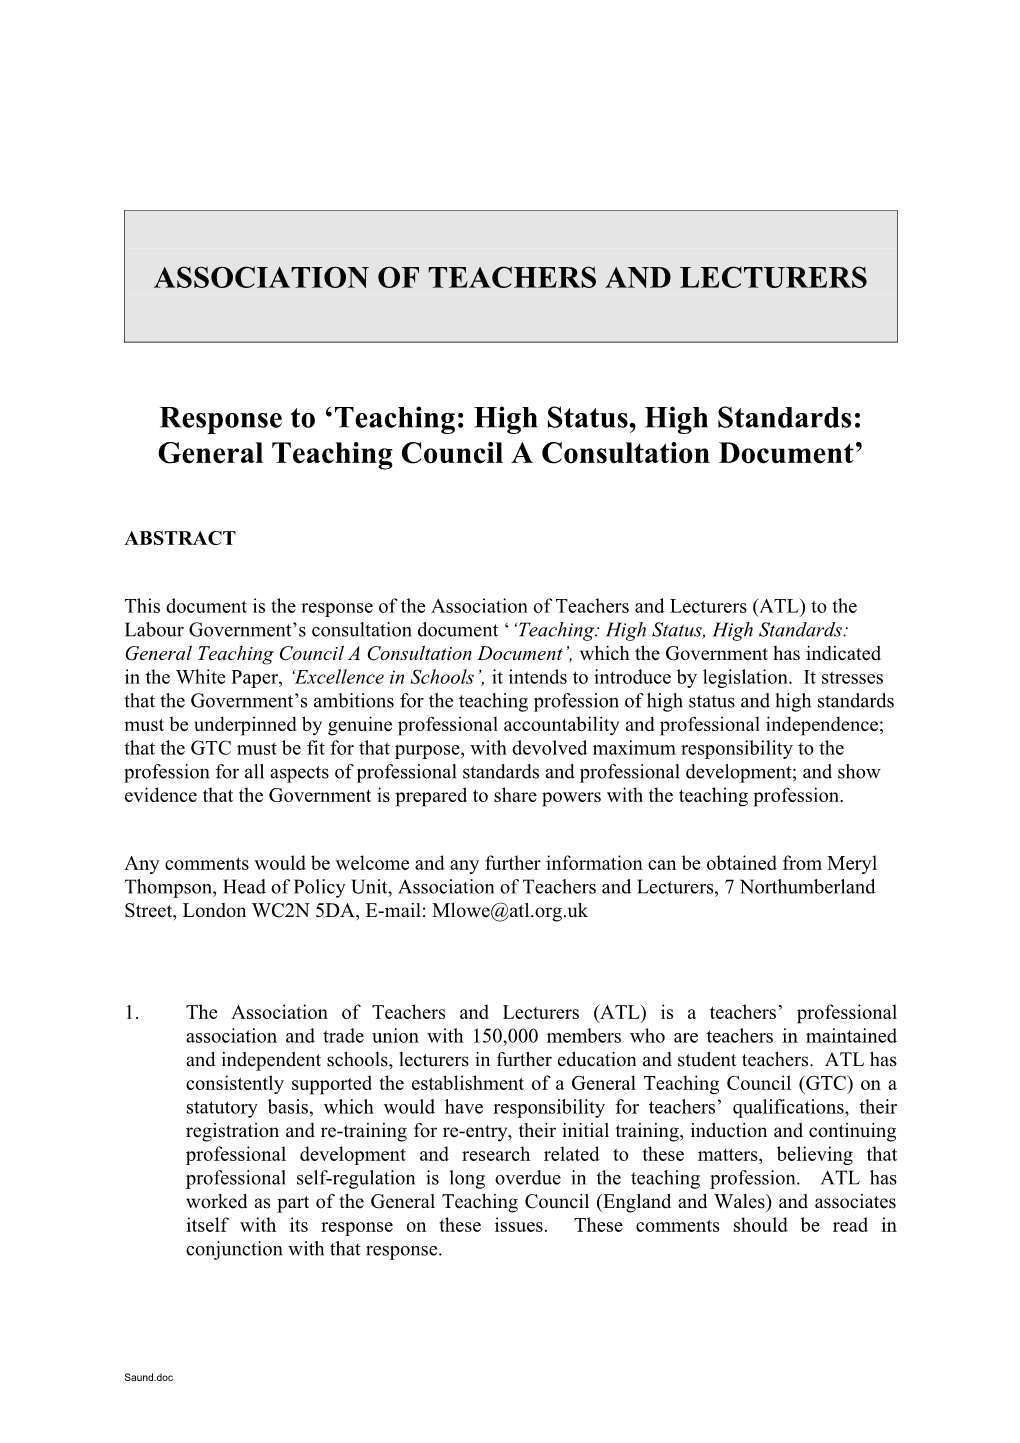 Response to Teaching: High Status, High Standards: General Teaching Council a Consultation